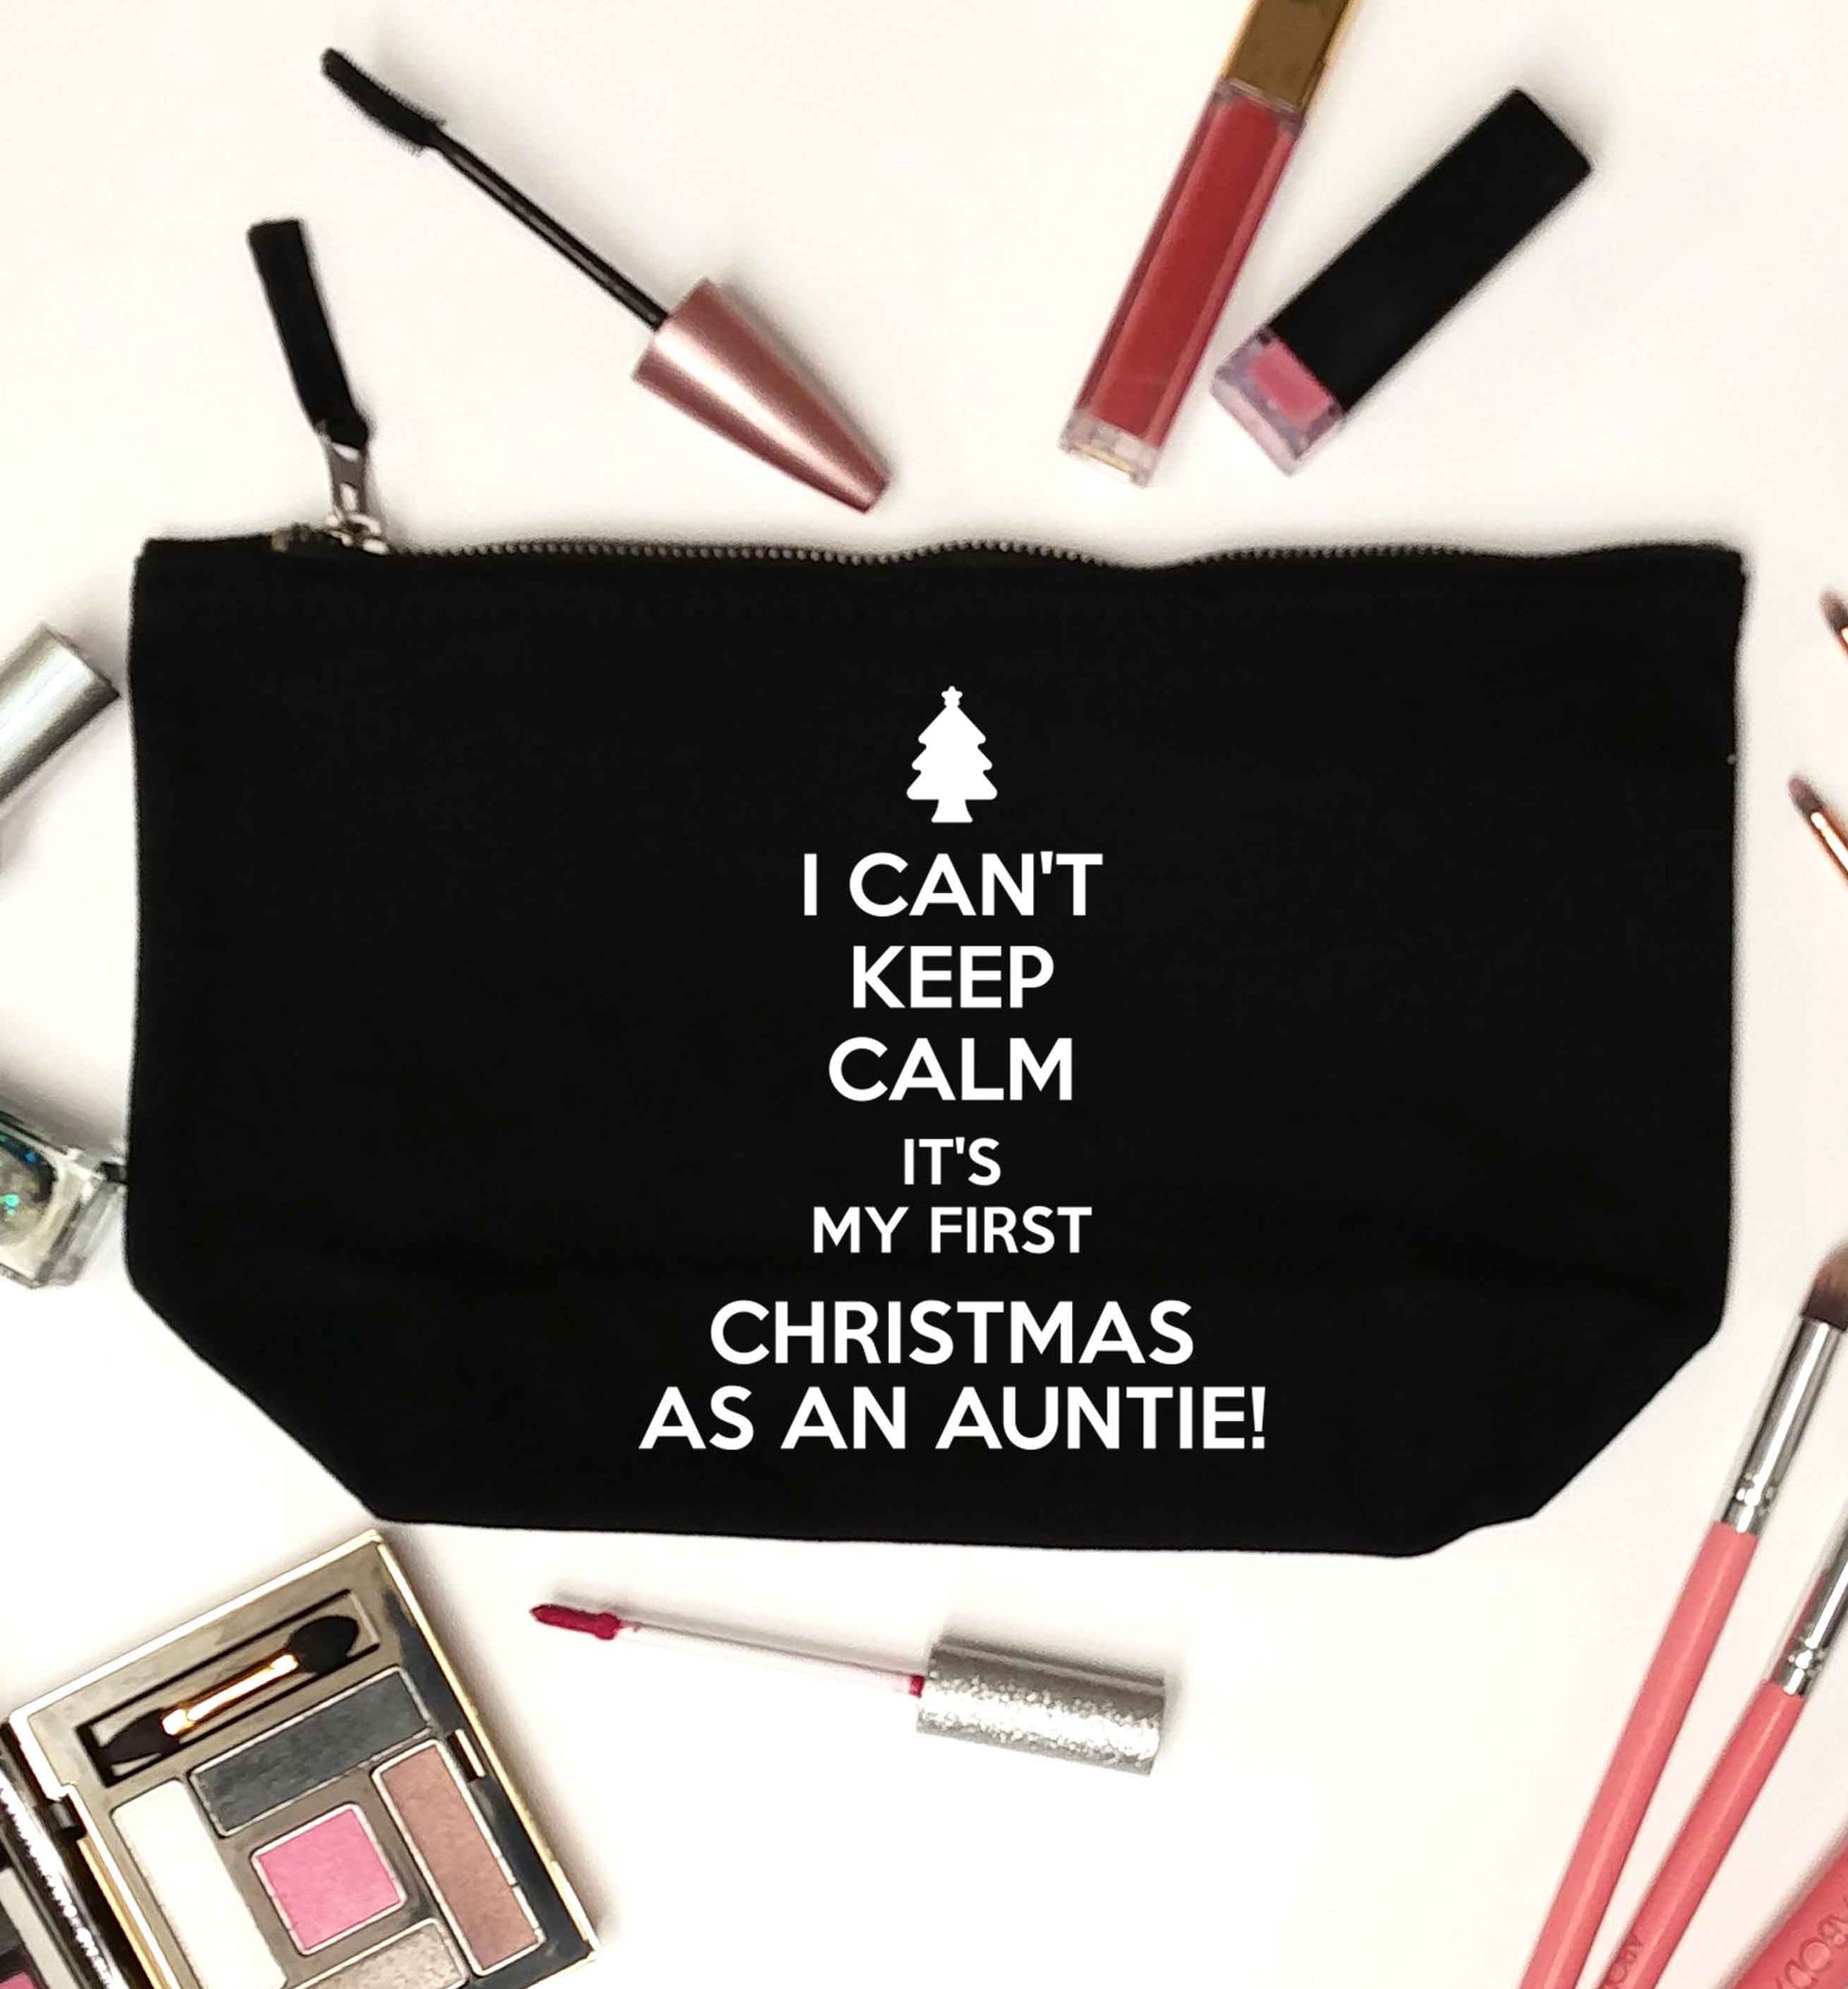 I can't keep calm it's my first Christmas as an auntie! black makeup bag